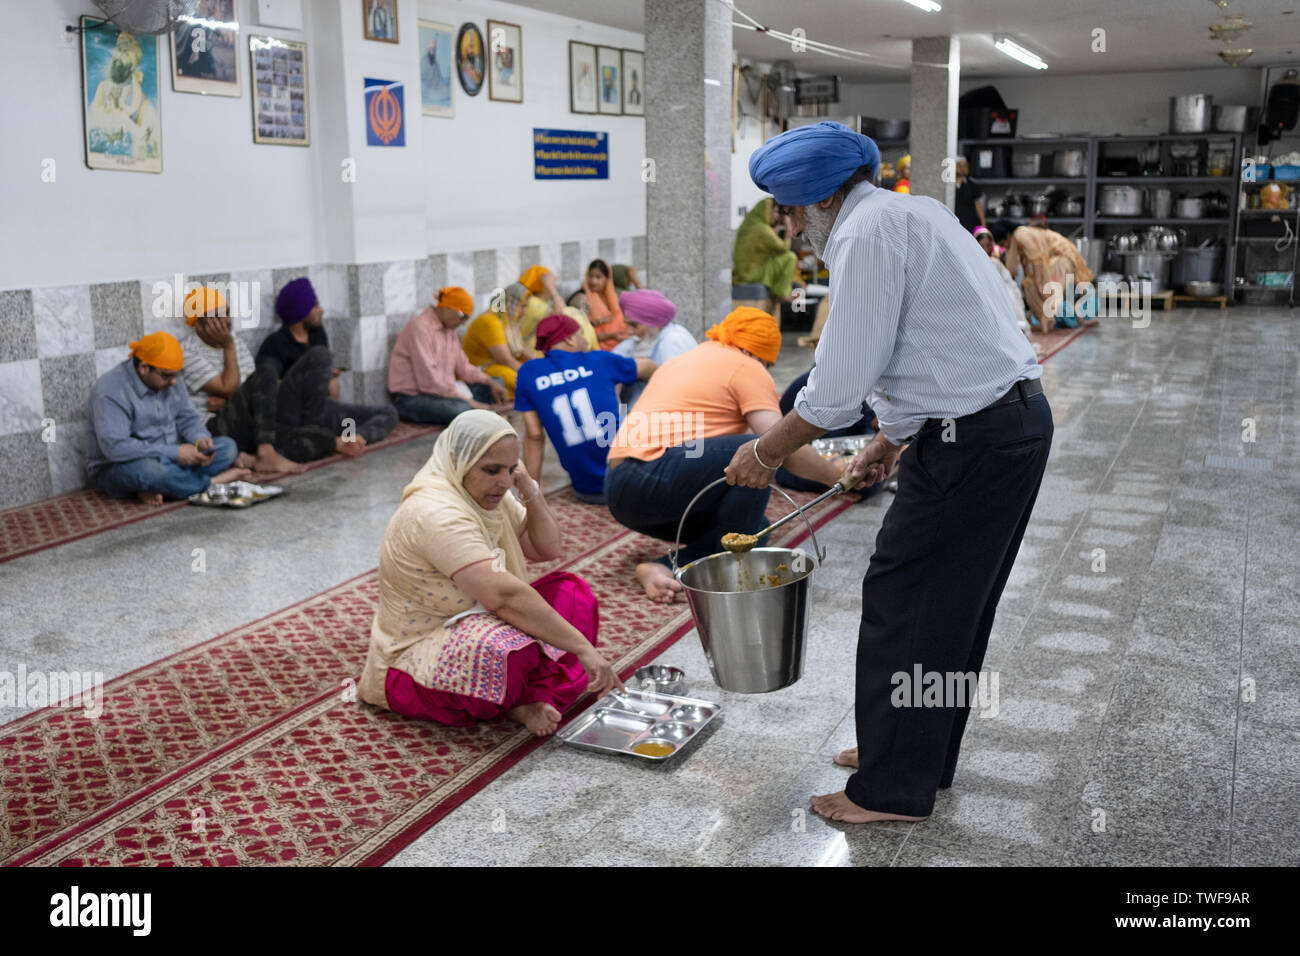 A Sikh man volunteering in the langar (free community kitchen) feeds a fellow worshipper in Flushing, Queens, New York City. Stock Photo